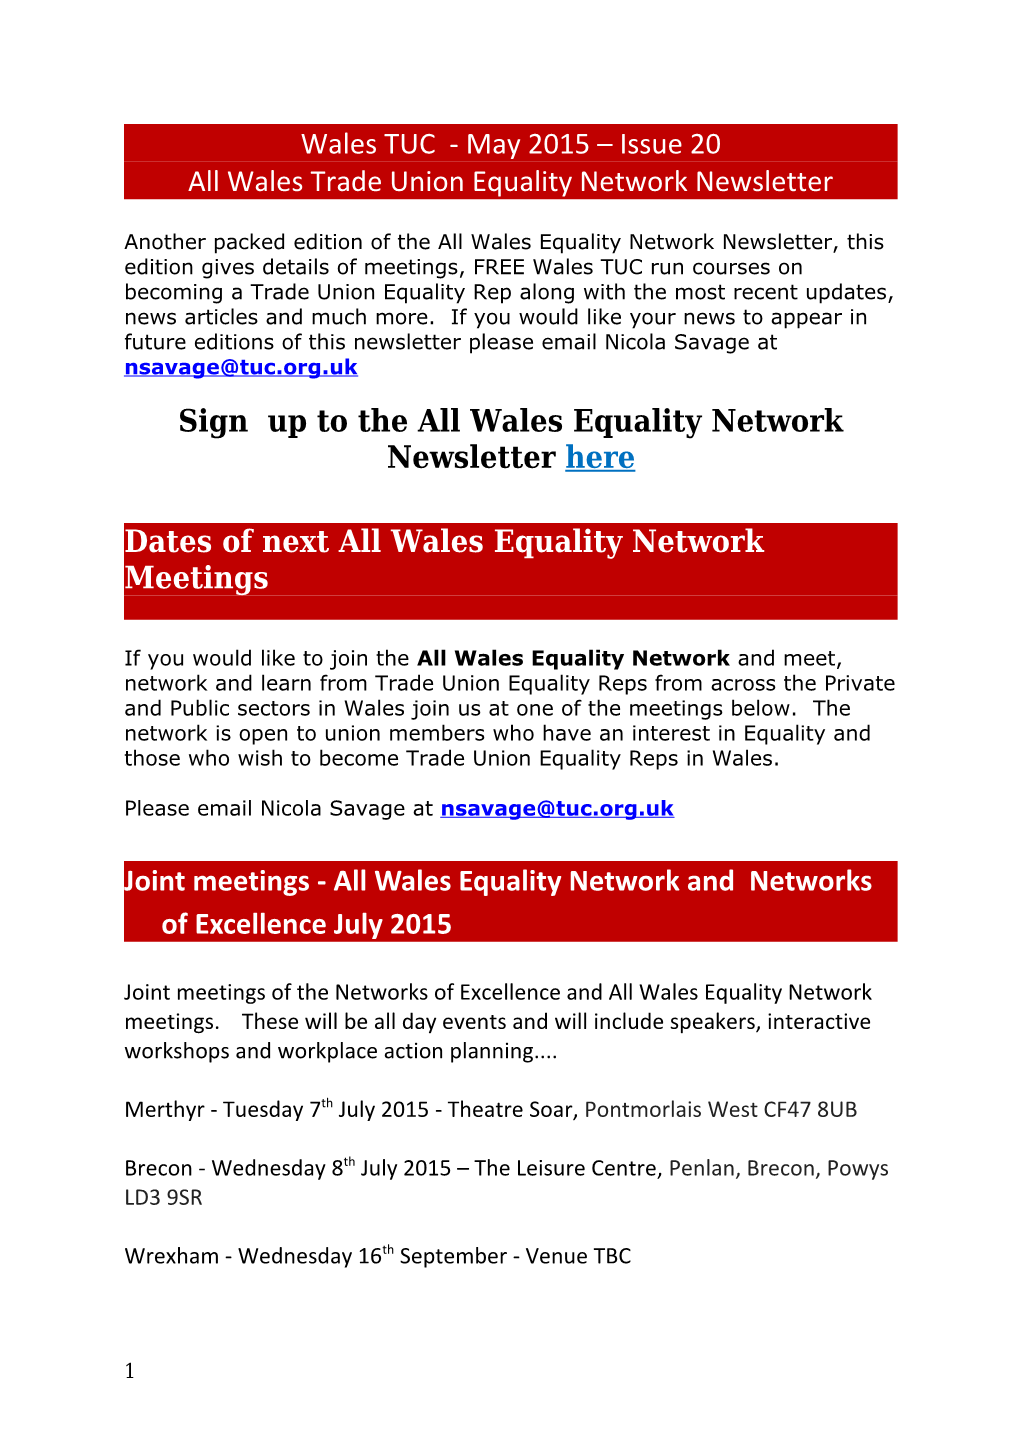 All Wales Trade Union Equality Network Newsletter